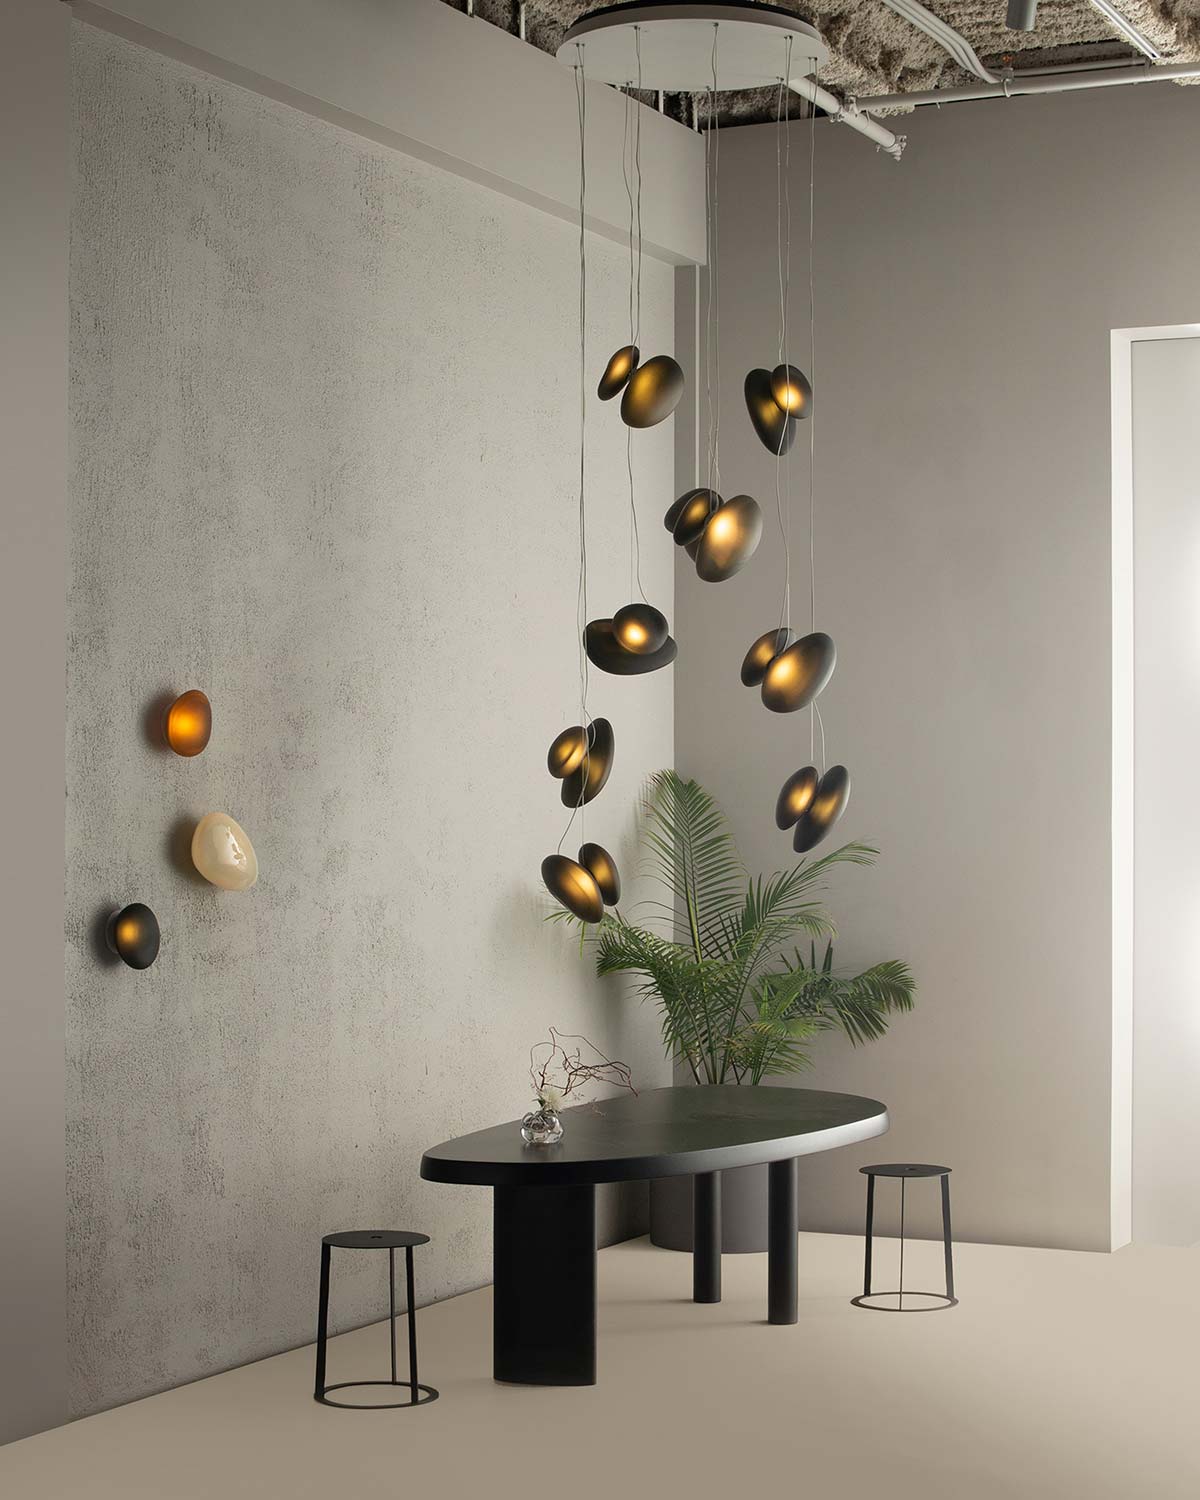 Pebble collection by ANDlight, Design Lukas Peet